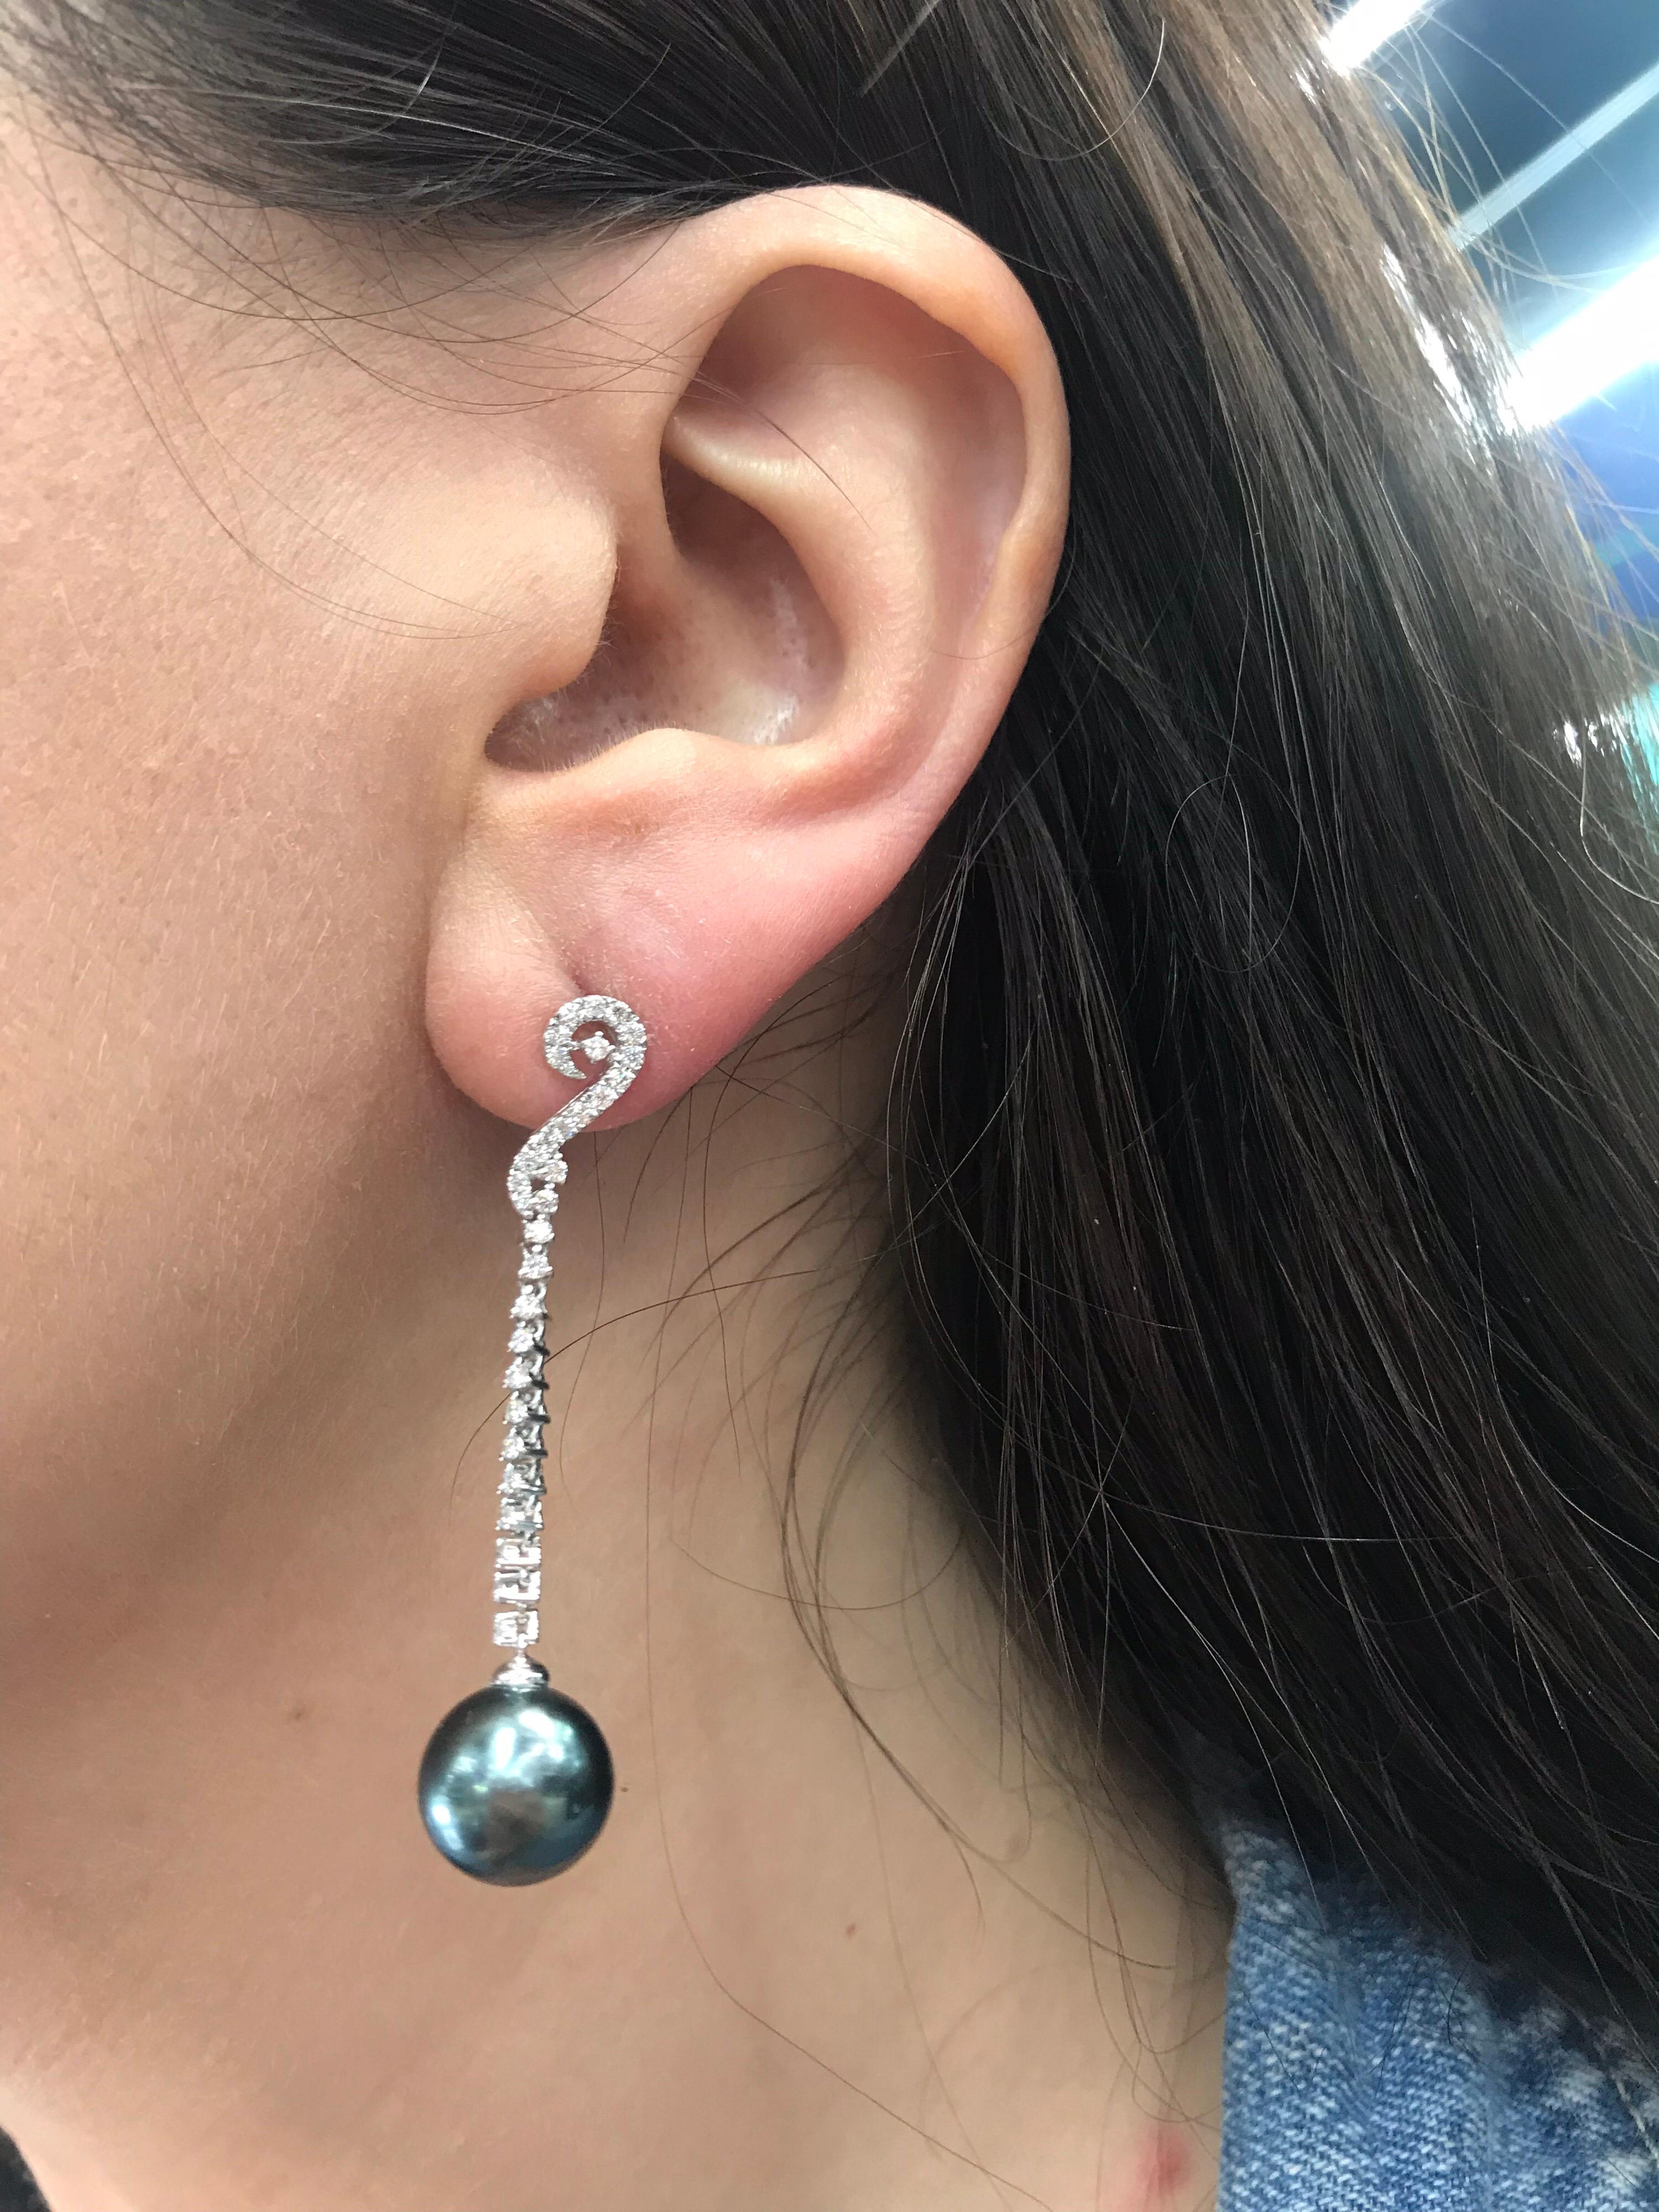 18K White gold drop earrings featuring 62 round brilliants weighing 0.52 carats and two Tahitian pearls measuring 10-11 mm. 